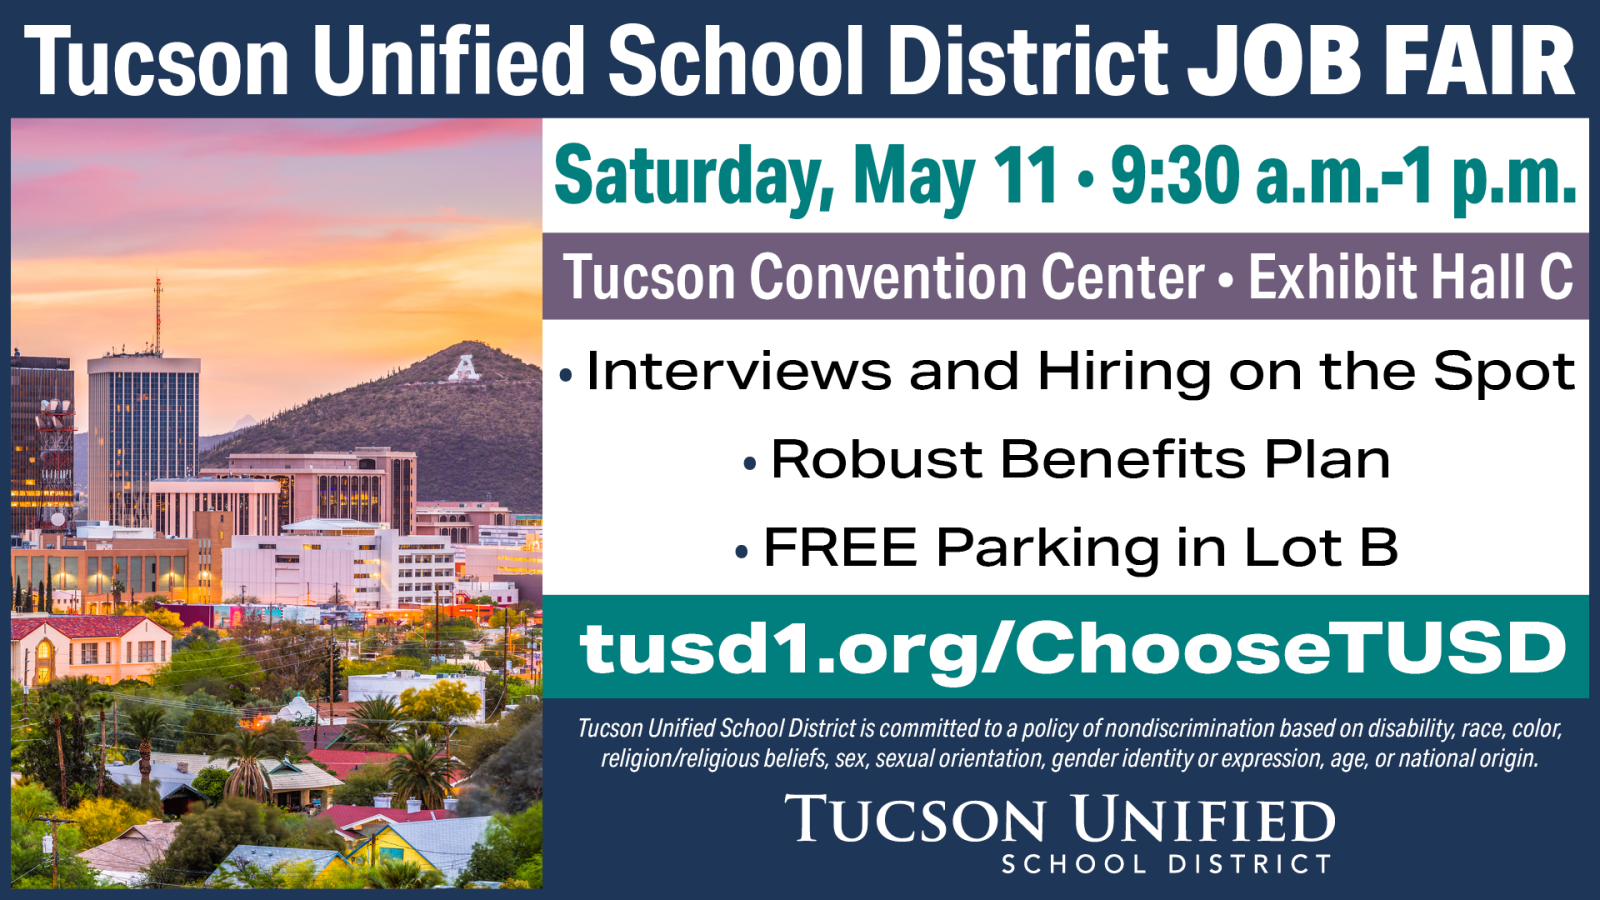 Join us on Saturday May 11 from 9:30 am - 1:00 pm at the ߲о Convention Center Exhibit Hall C (260 S. Church Ave.) for the ߲о Unified School District Job Fair!  Interviews and Hiring on the Spot Robust Benefits Plan FREE Parking in Lot B  